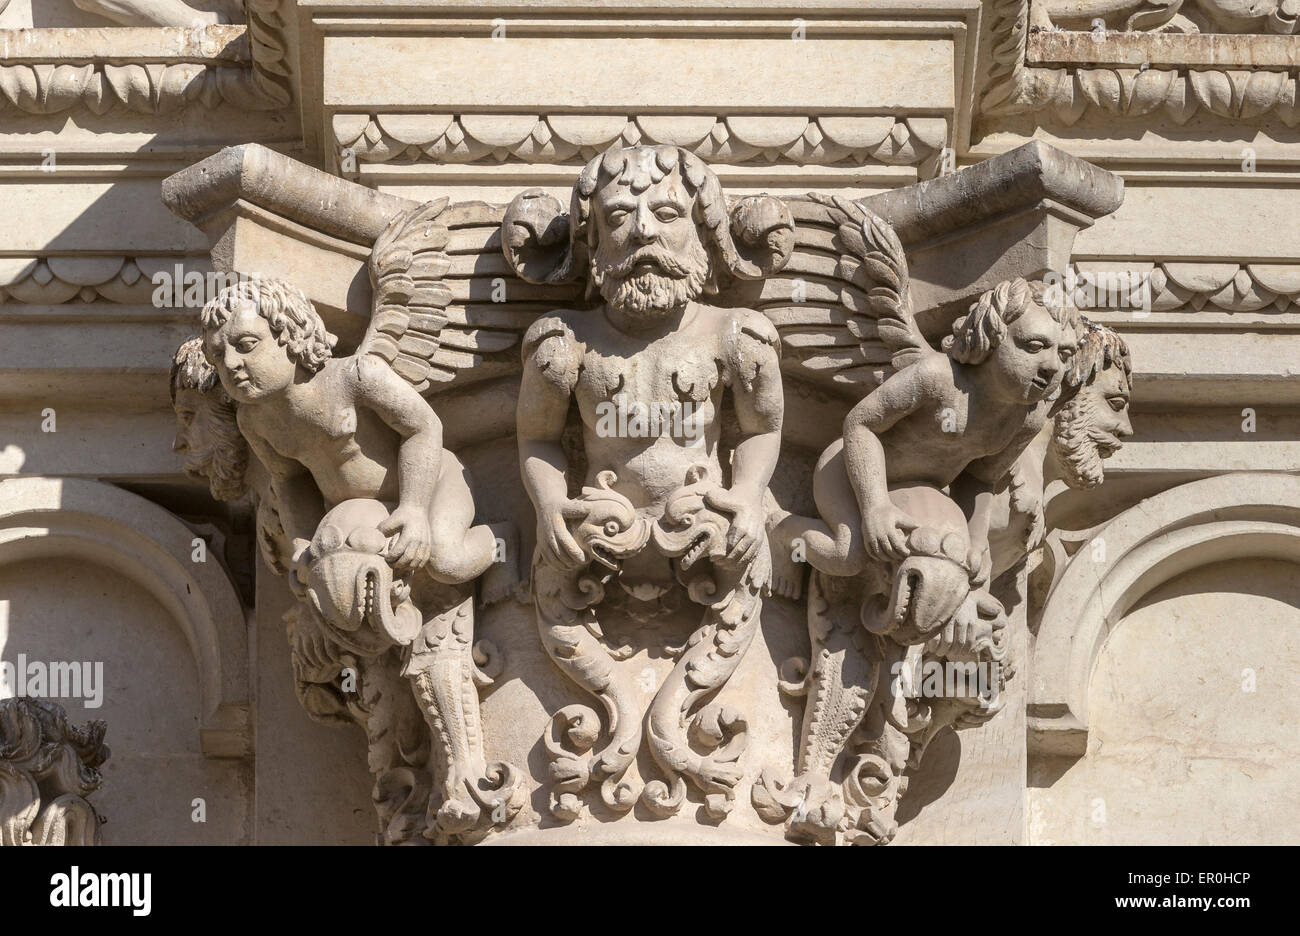 Detail of the exterior of the Basilica di Santa Croce at Lecce in Puglia with rich sculptures Stock Photo